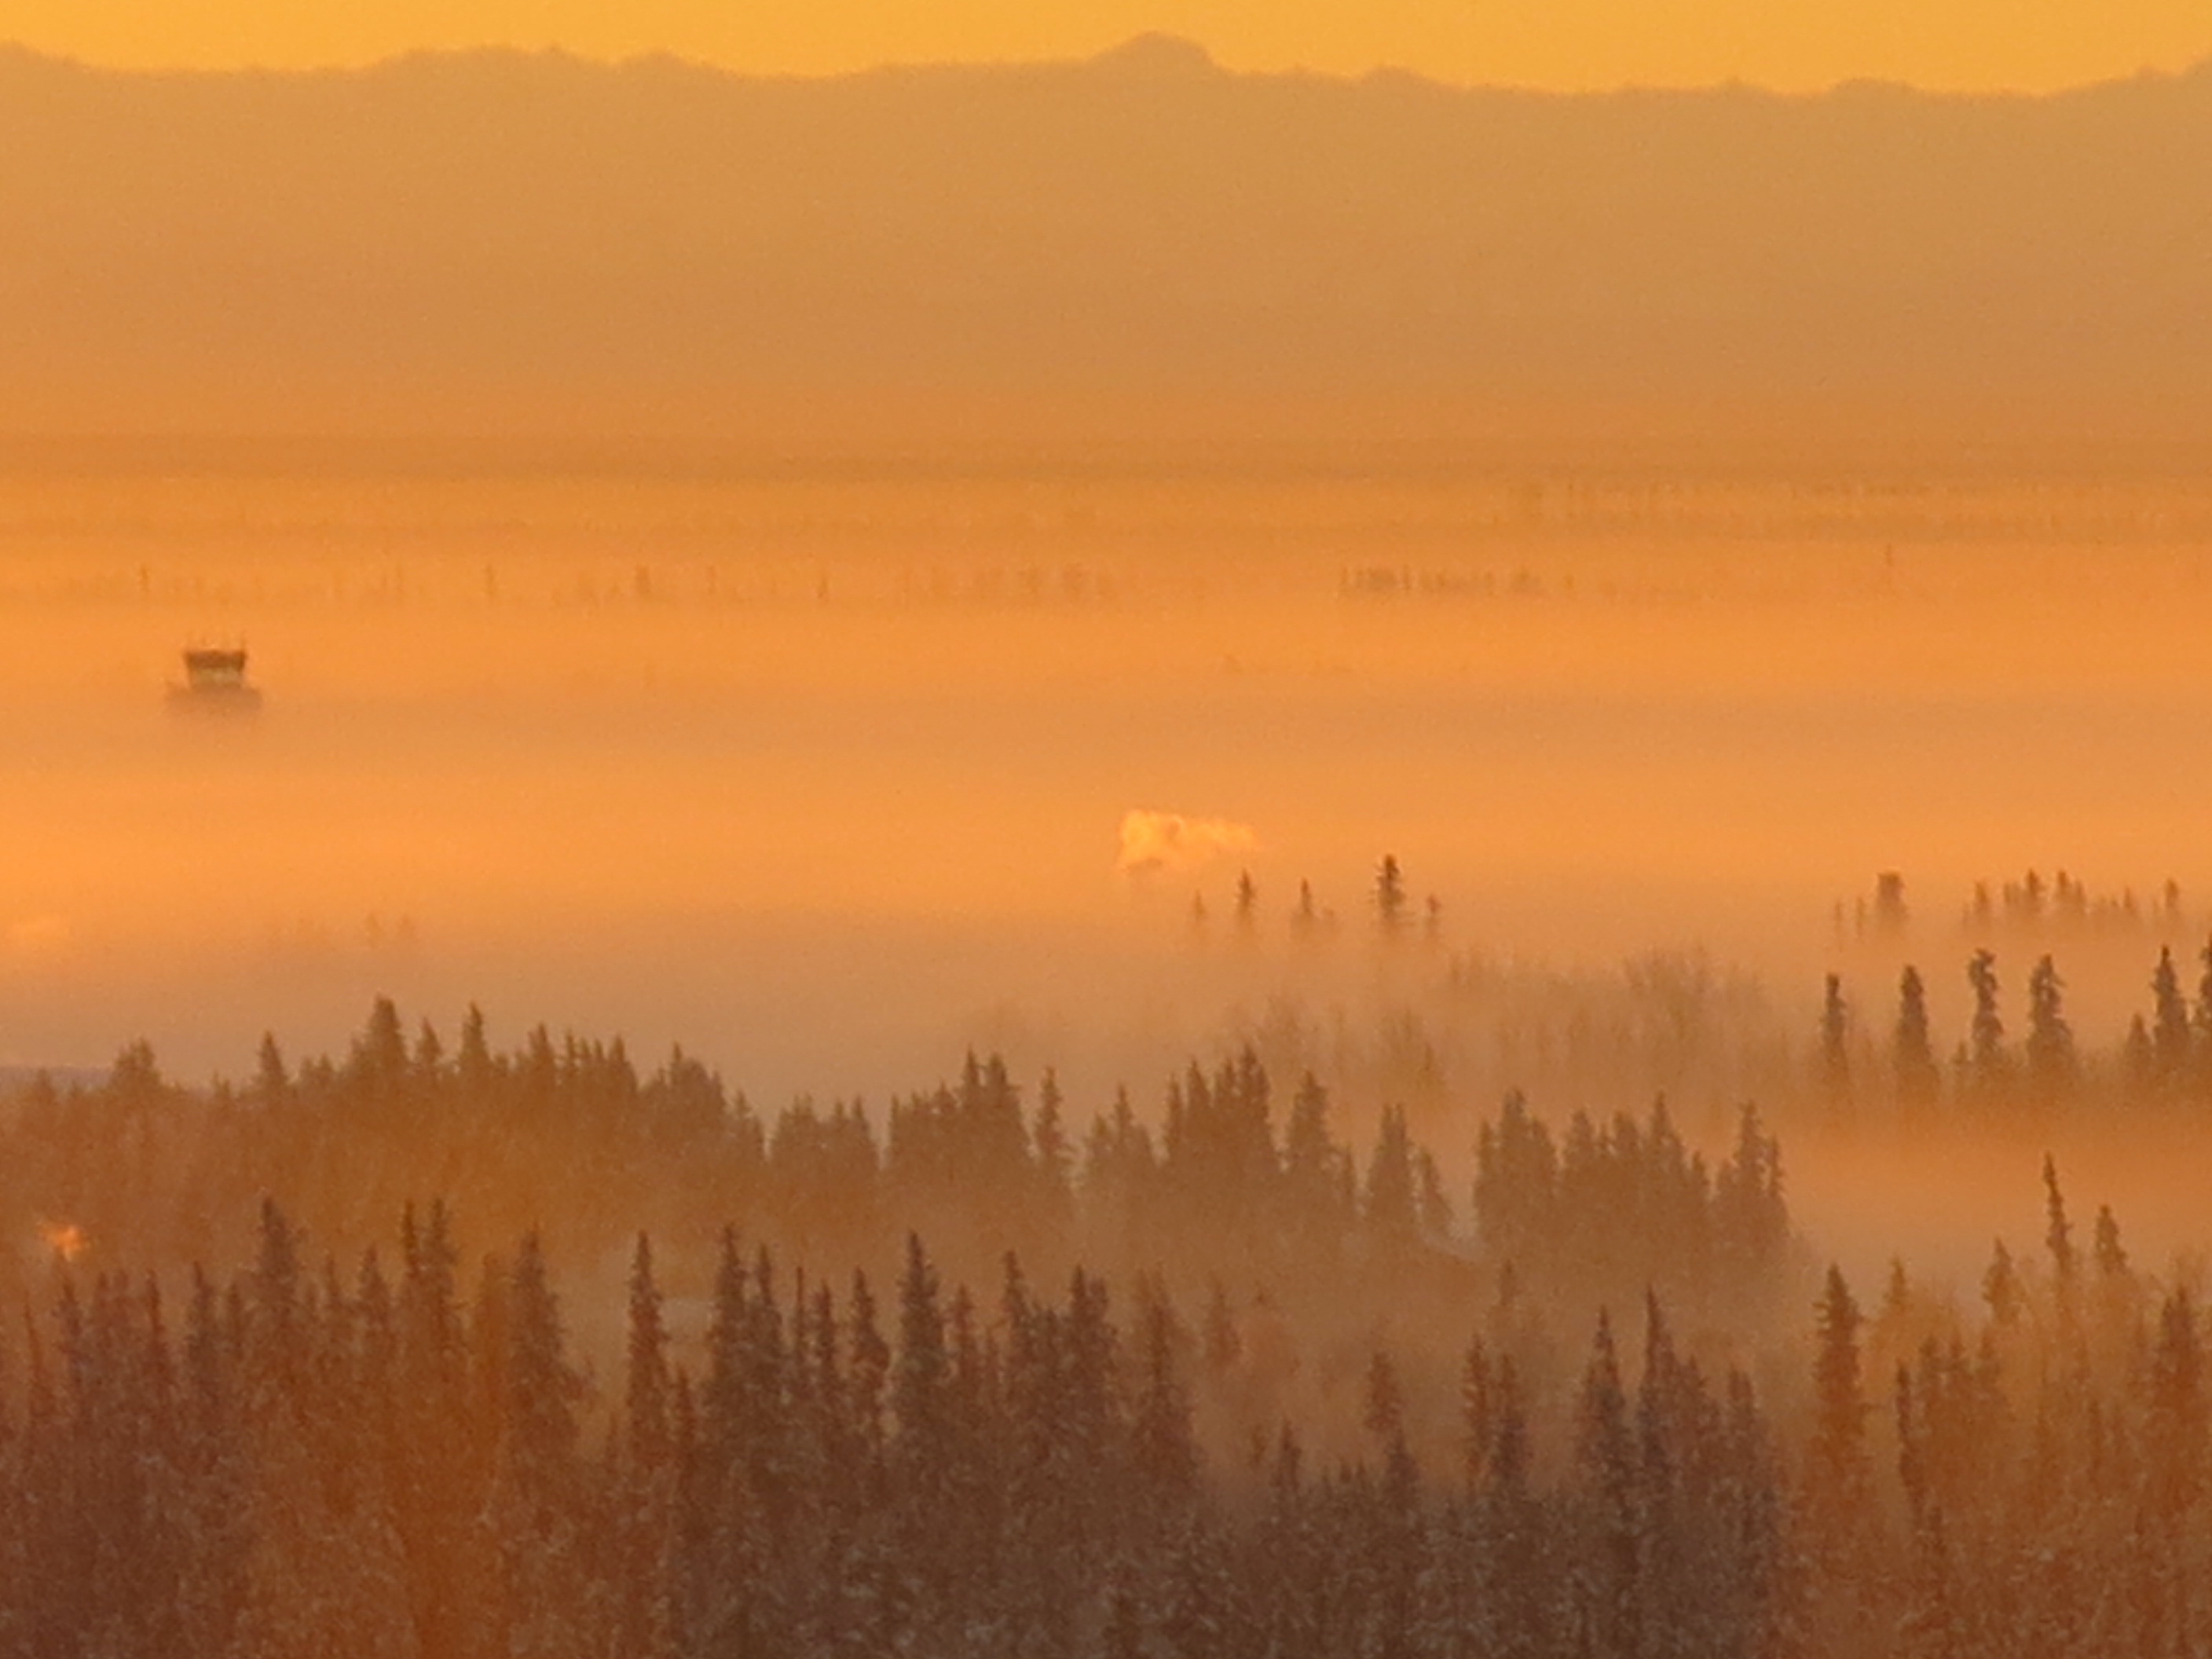 Orange mid-winter light bathes a flatland covered in a low-lying fog. The tops of spruce trees and of an airport control tower poke up through the fog. Mountains form a distant rugged horizon. 